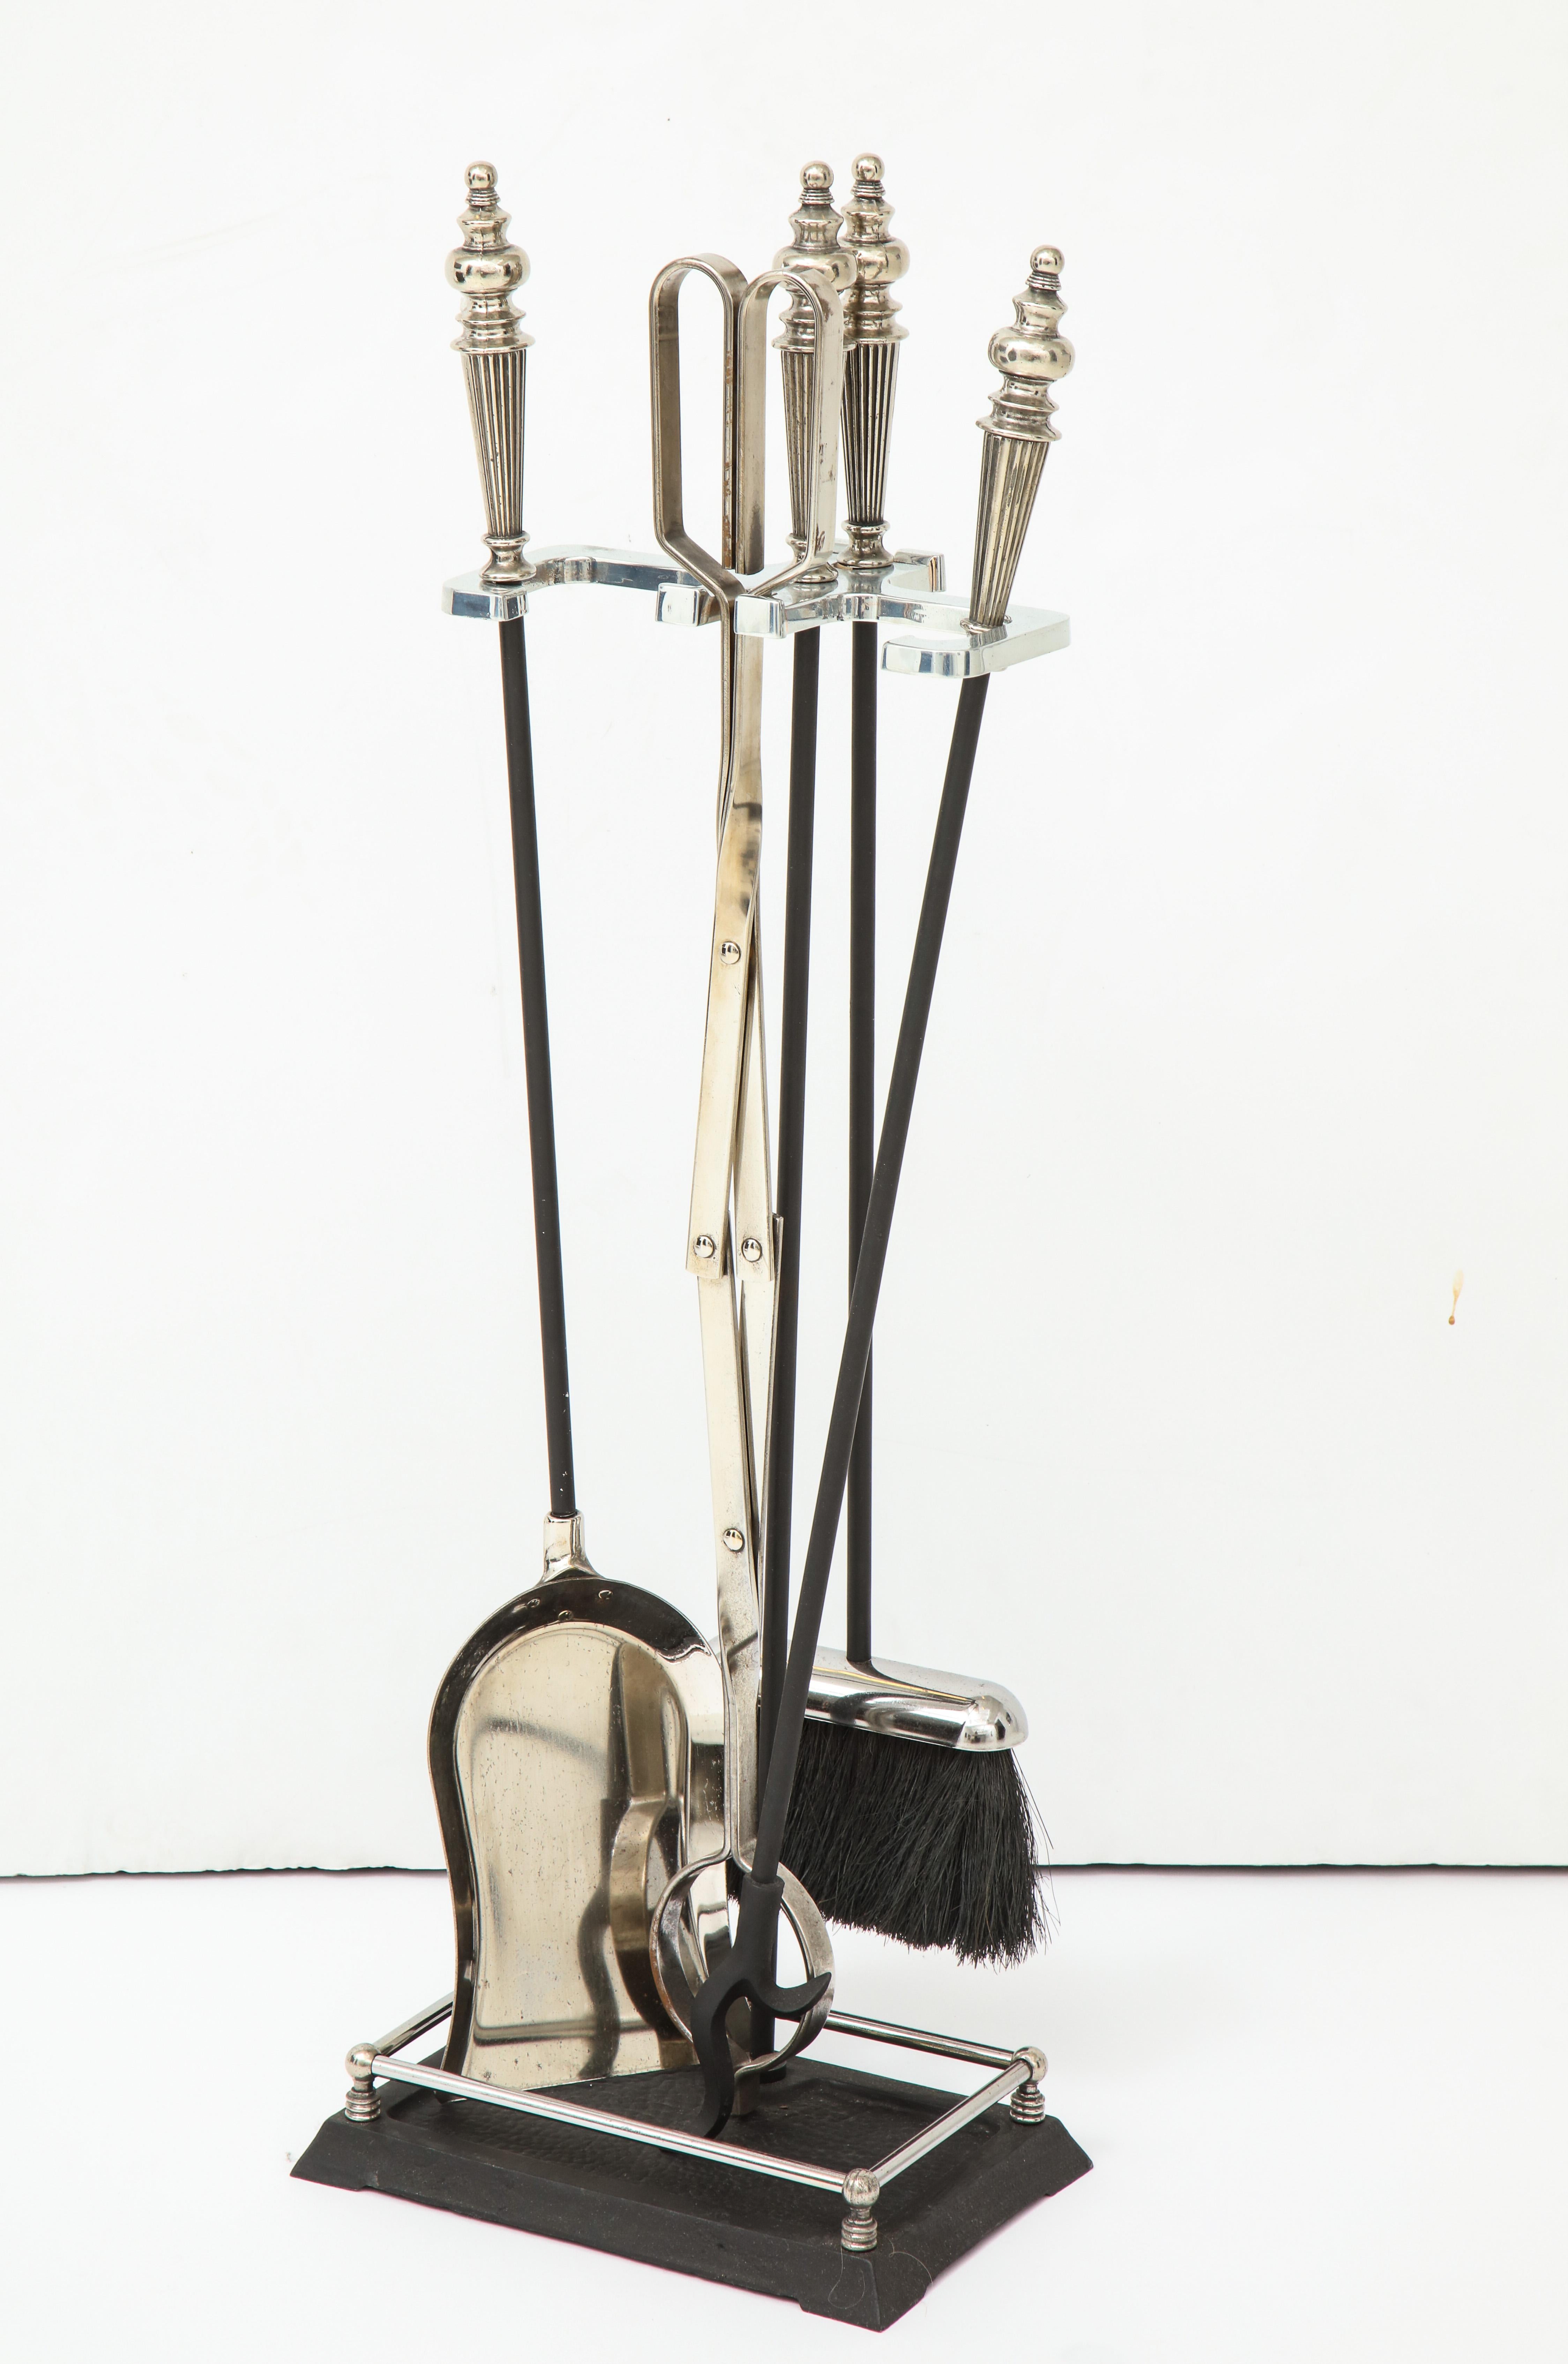 Set of Hollywood Regency fire tools with polished nickel turned finials and blackened steel construction. Set includes stand, poker, broom, tongs, and shovel.